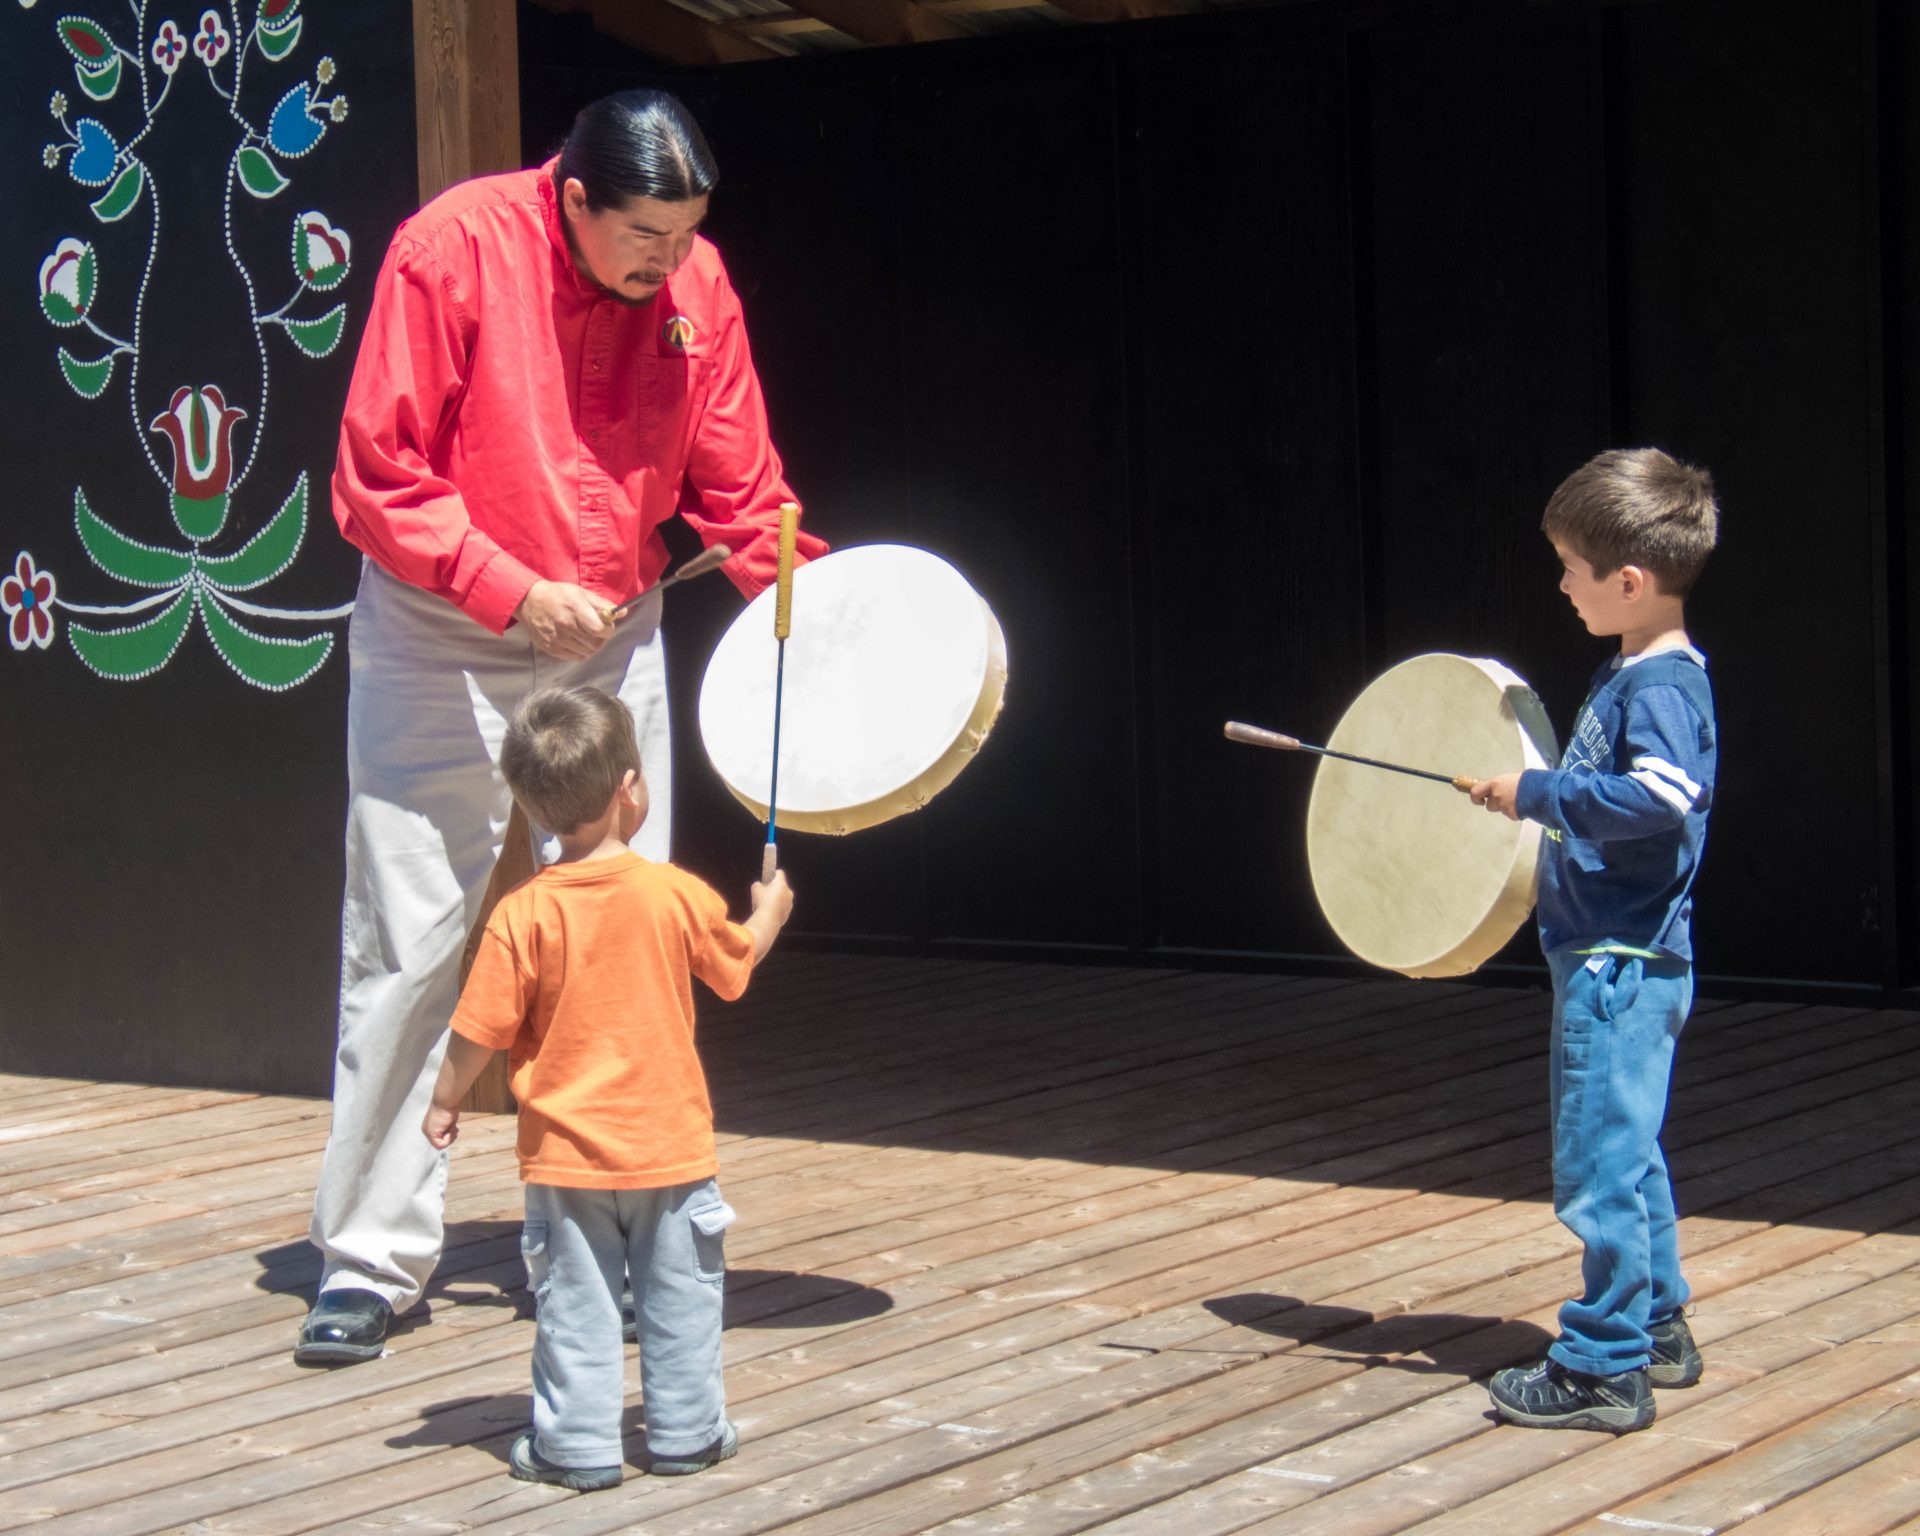 Elder teaches boys some of the intricacies of drumming as part of the Great Spirit Trail Voice of the Drum Make and Take Experience on Manitoulin Island.